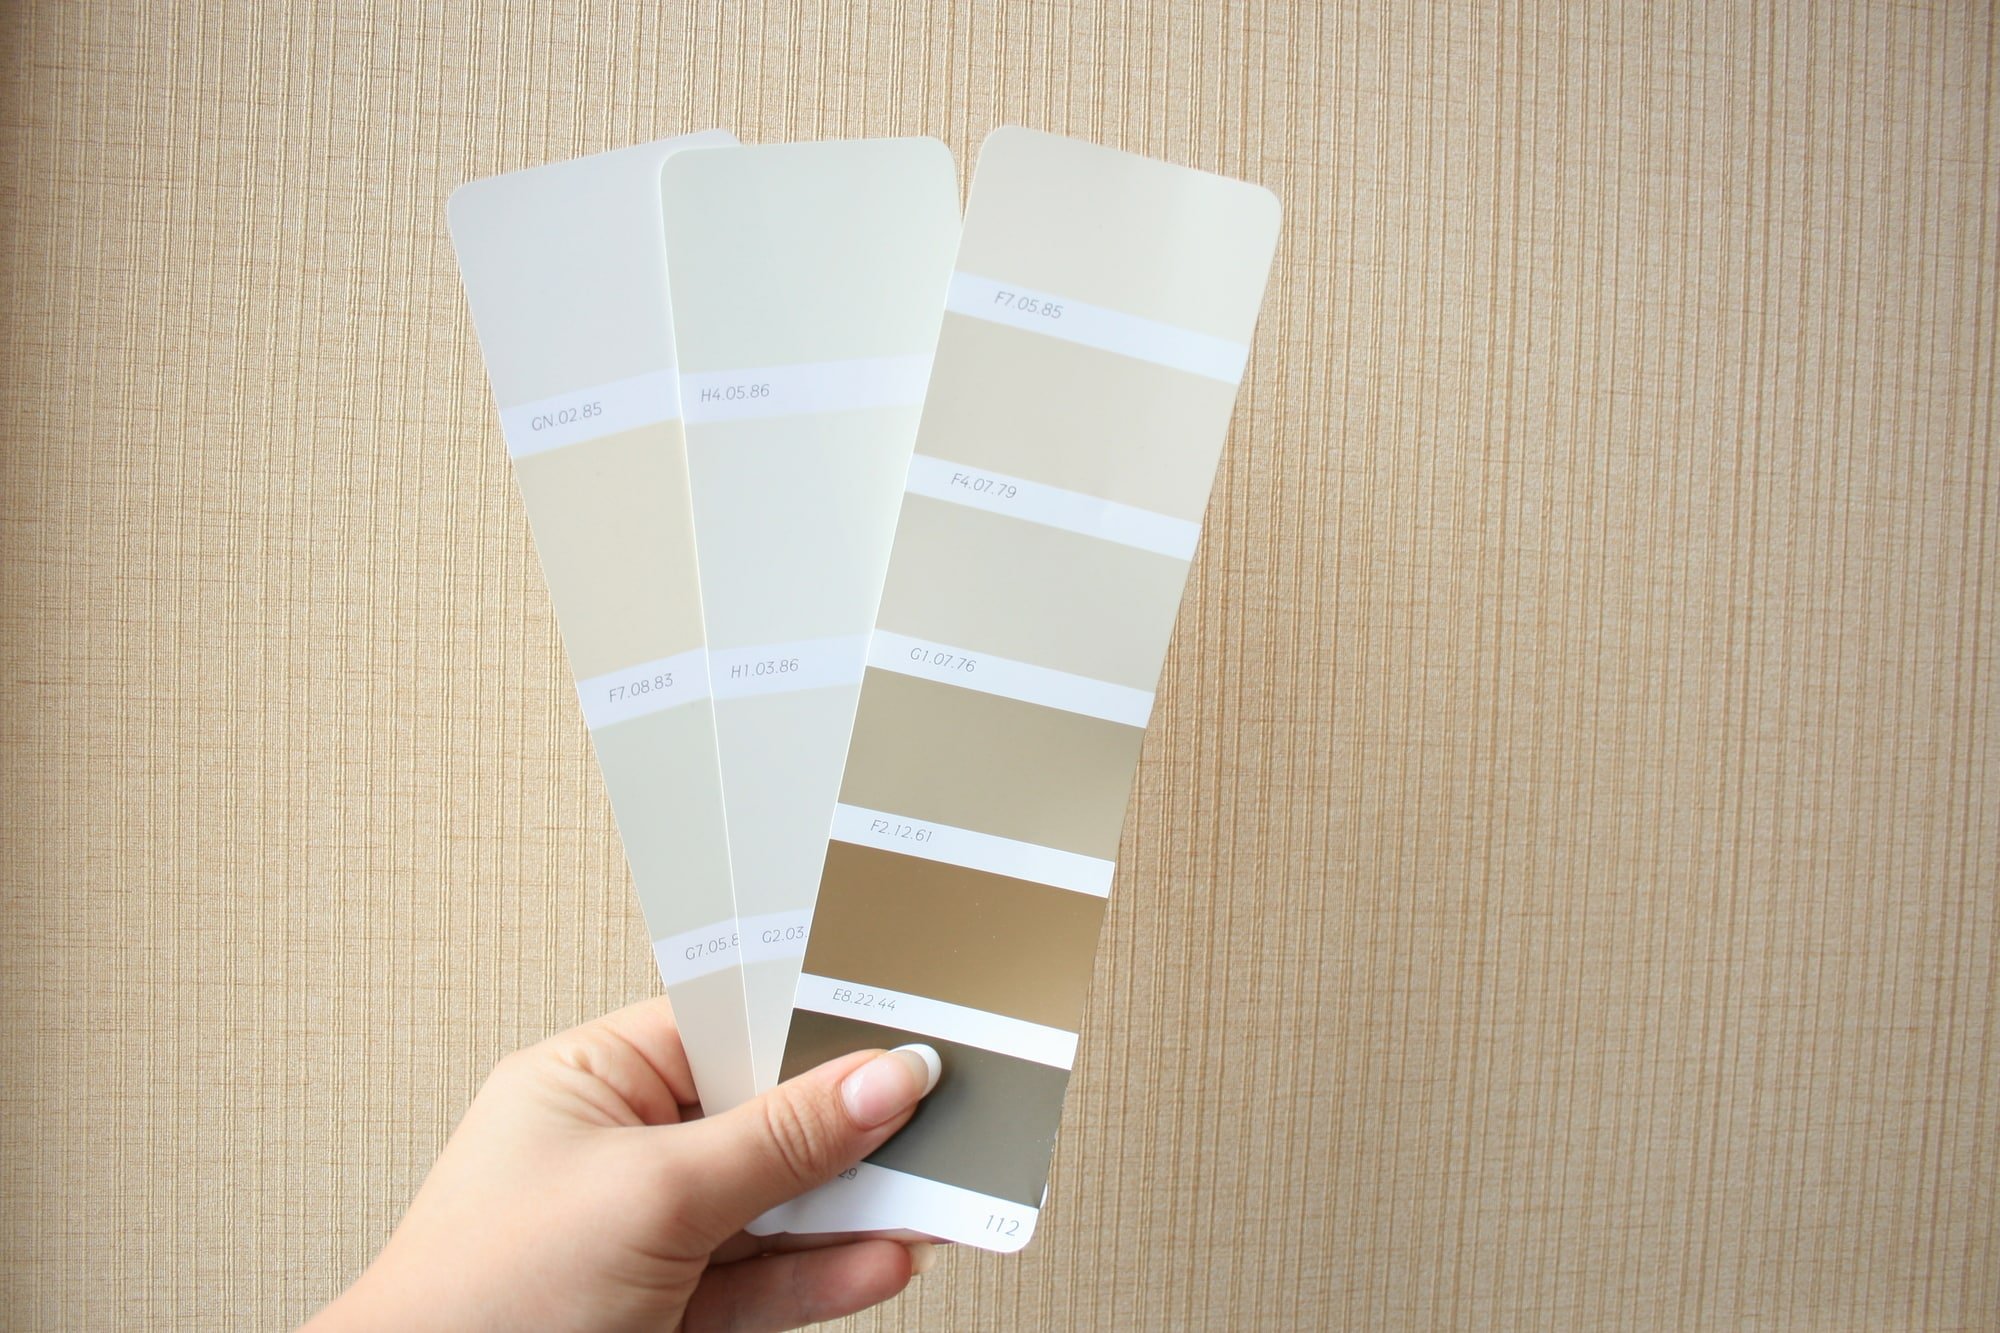 Paint chips to help pick a color scheme when decorating the living room